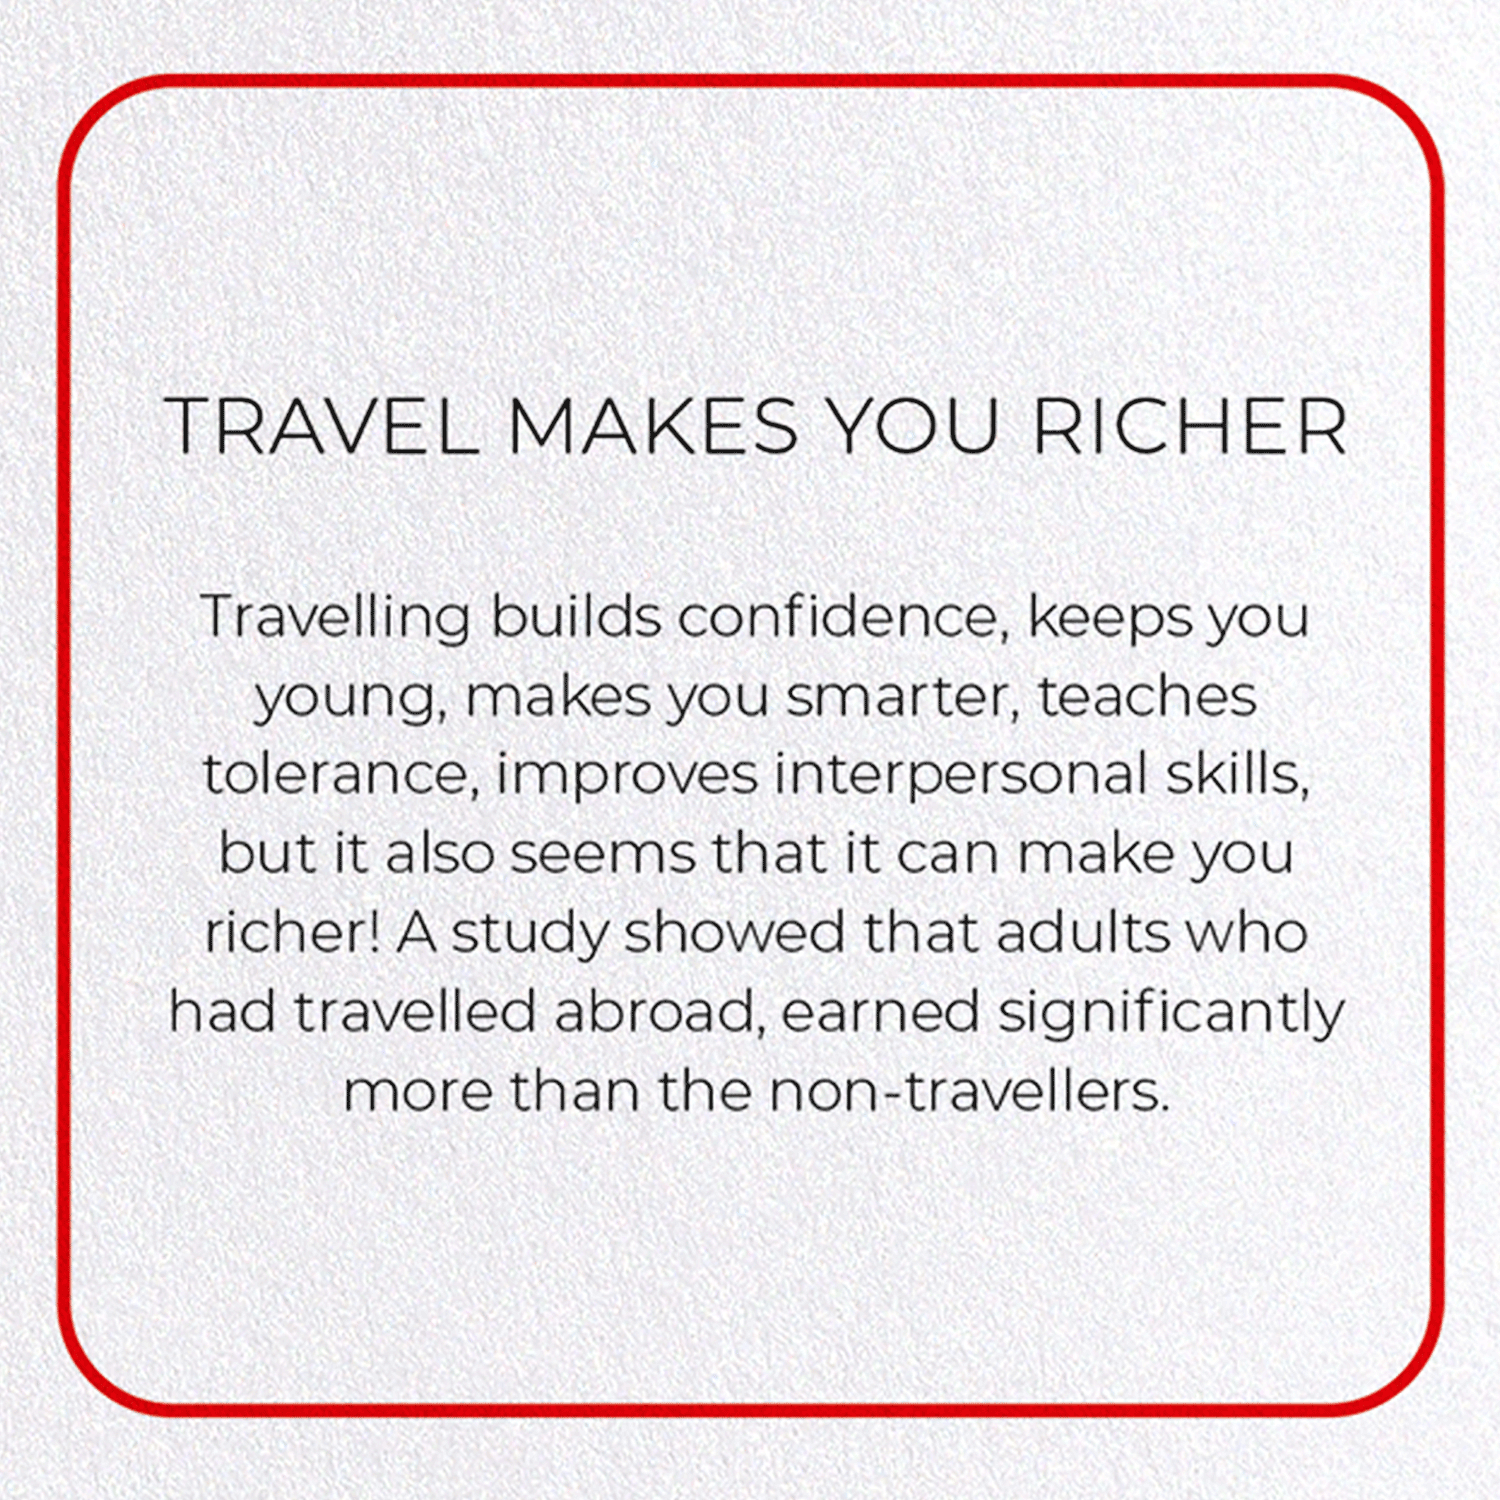 TRAVEL MAKES YOU RICHER